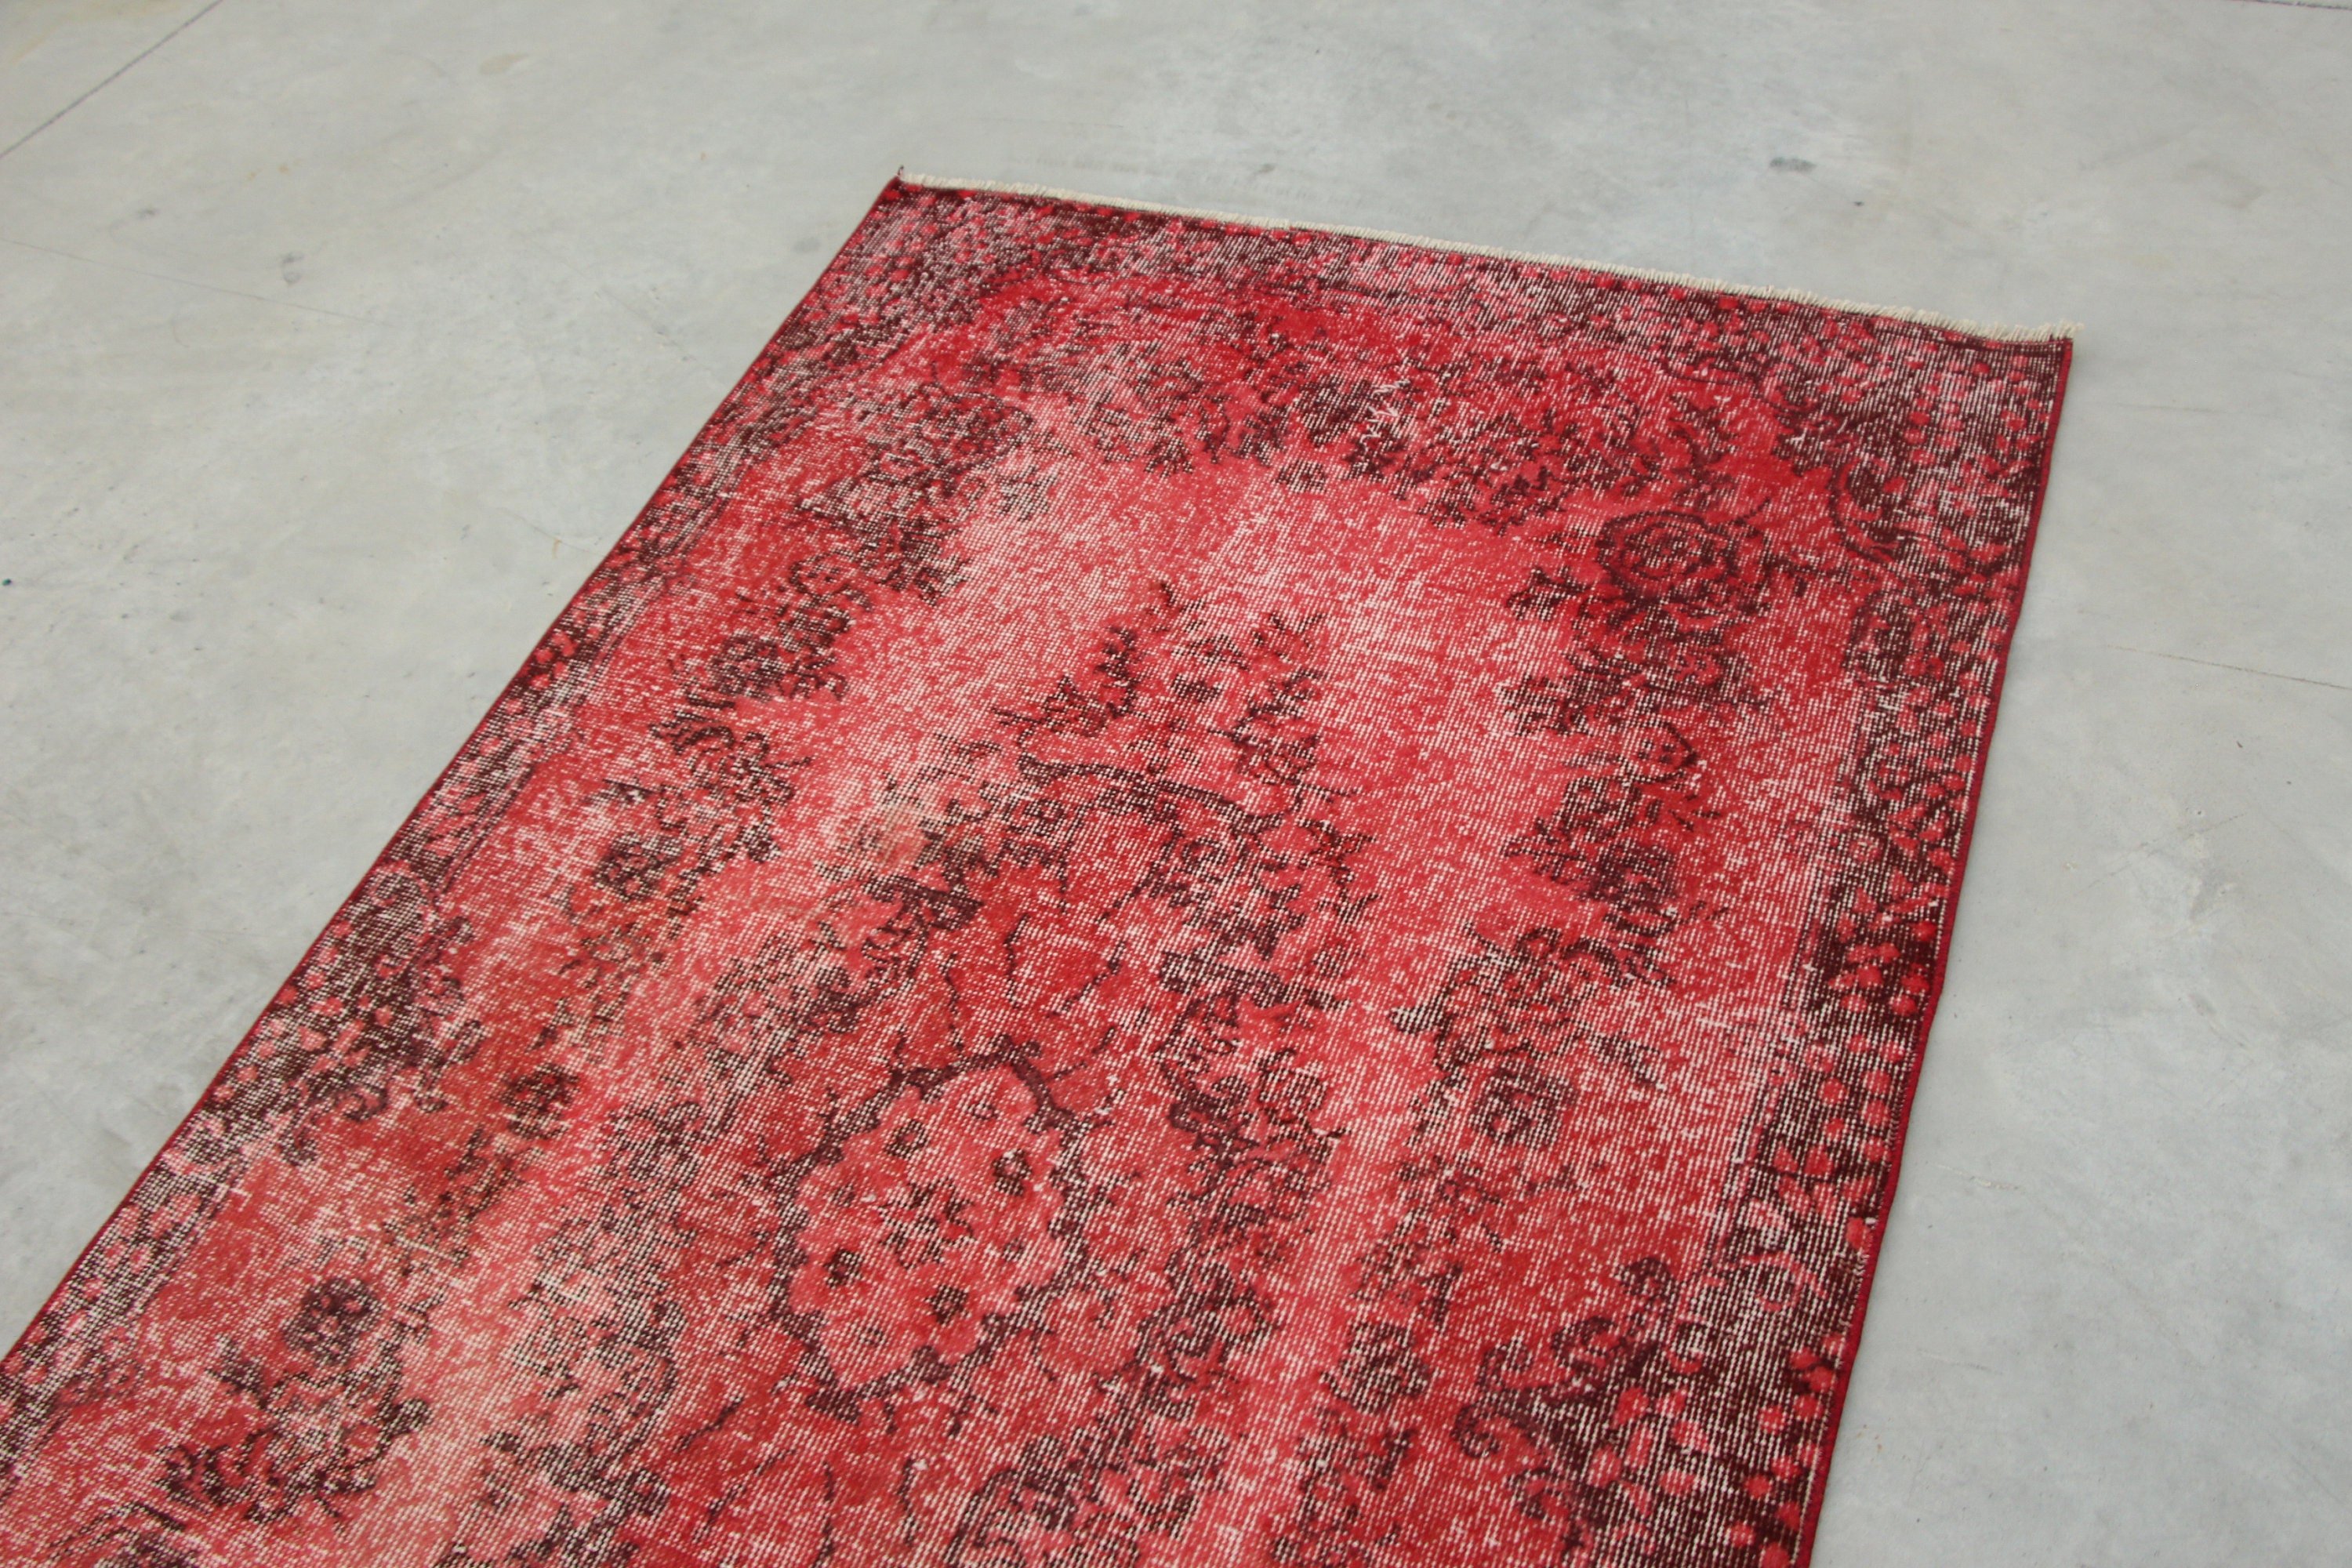 Rugs for Bedroom, 3.6x6.6 ft Accent Rug, Oushak Rug, Red Kitchen Rugs, Home Decor Rug, Nursery Rug, Abstract Rug, Turkish Rugs, Vintage Rug